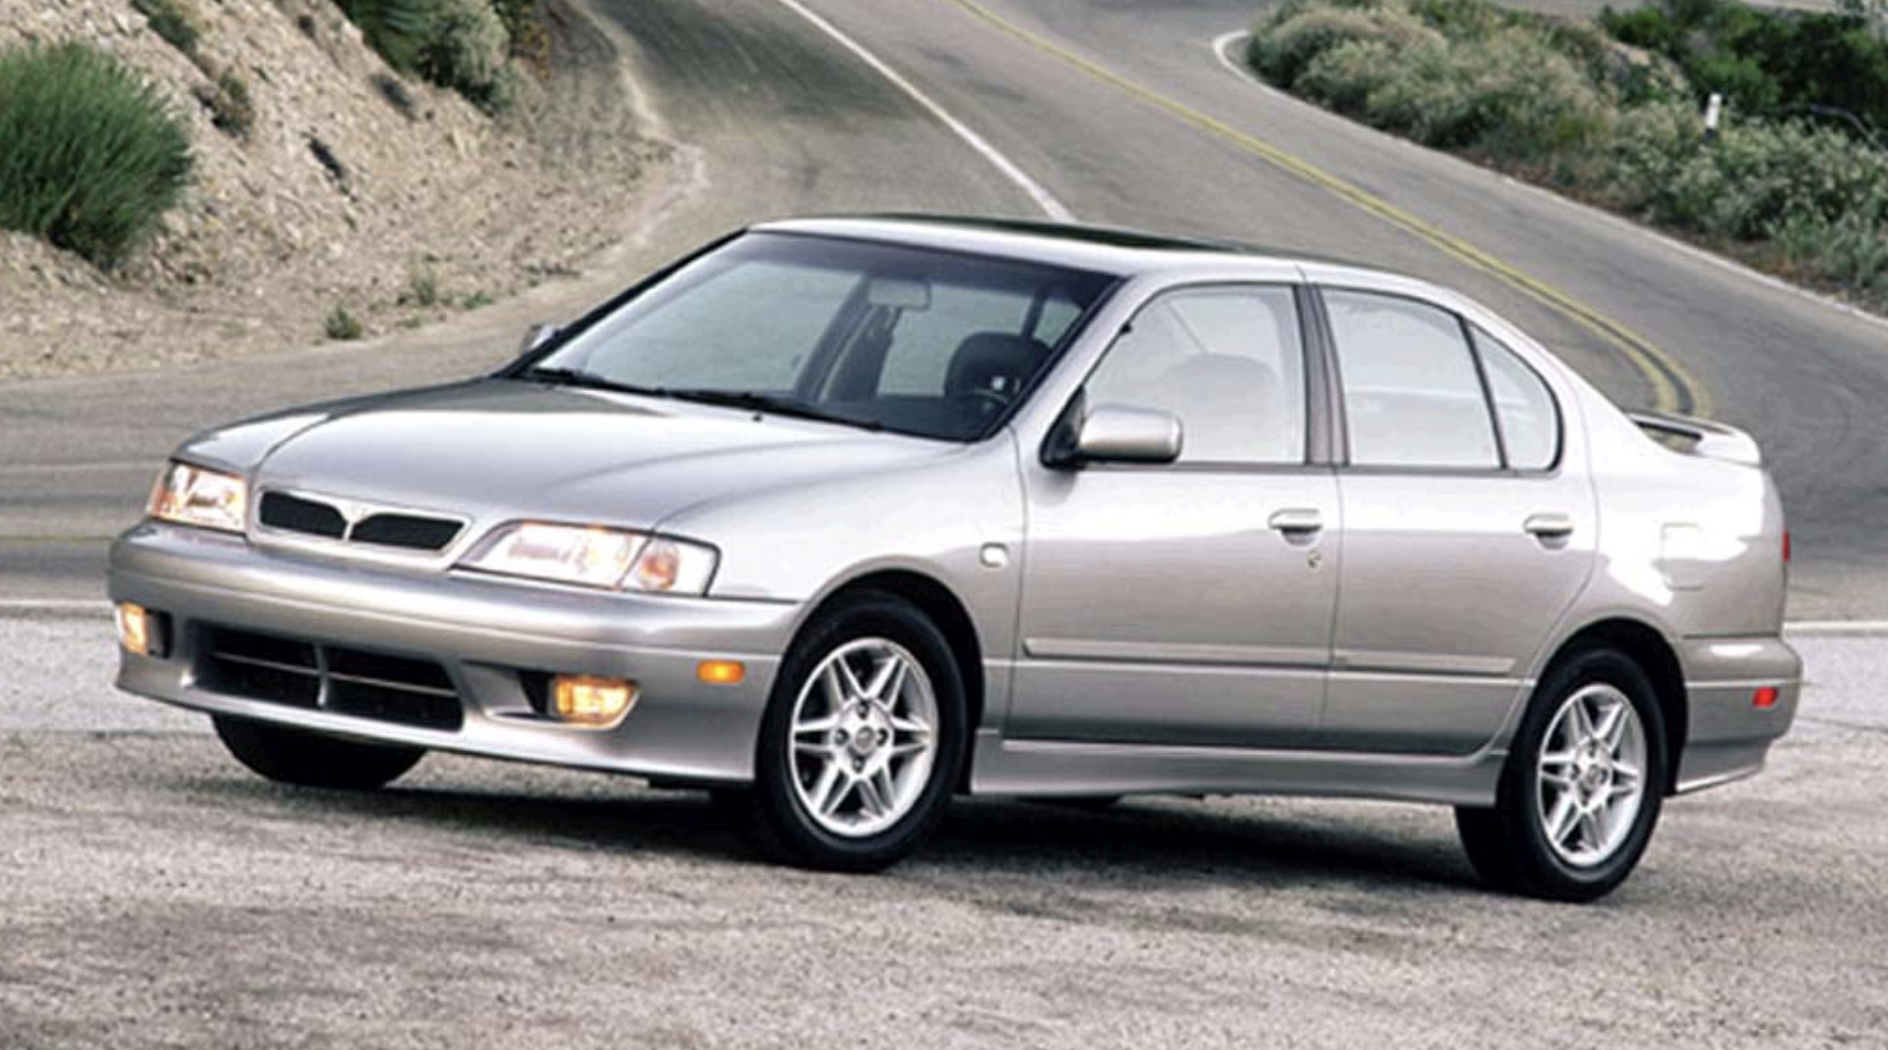 Quick Look: 2002 Infiniti G20 | The Daily Drive | Consumer Guide® The Daily  Drive | Consumer Guide®